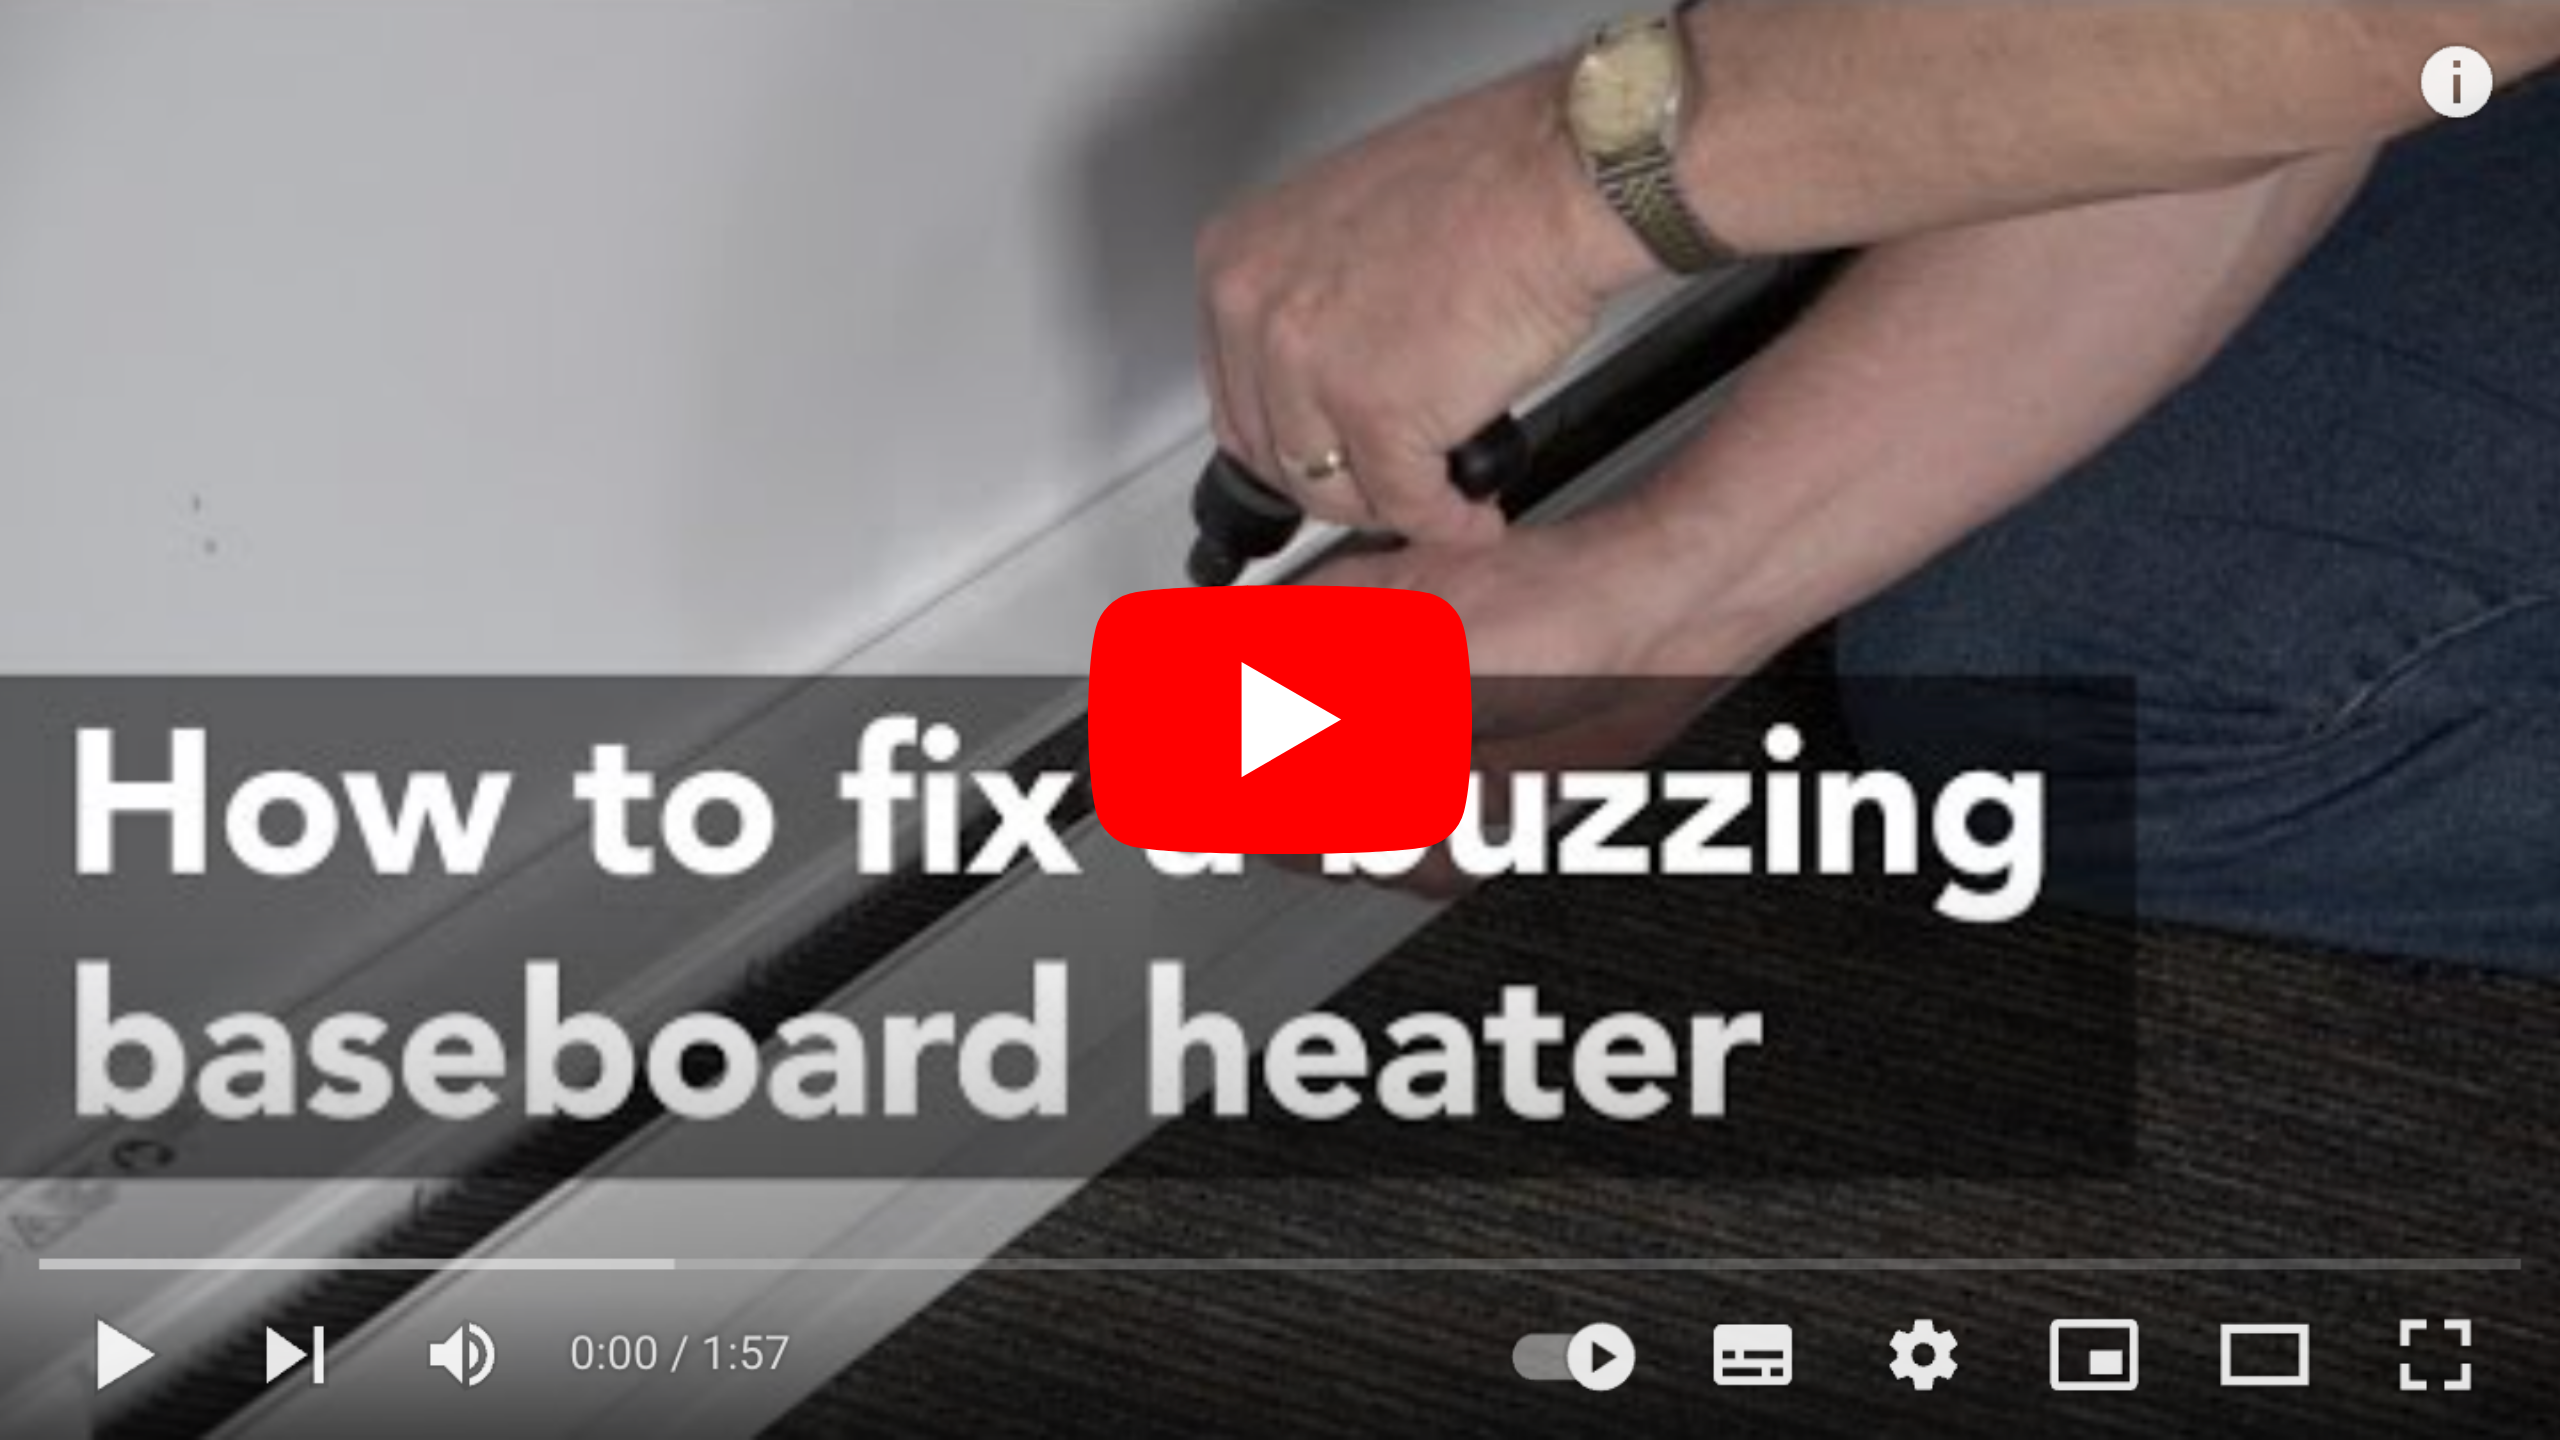 How to fix a buzzing heater